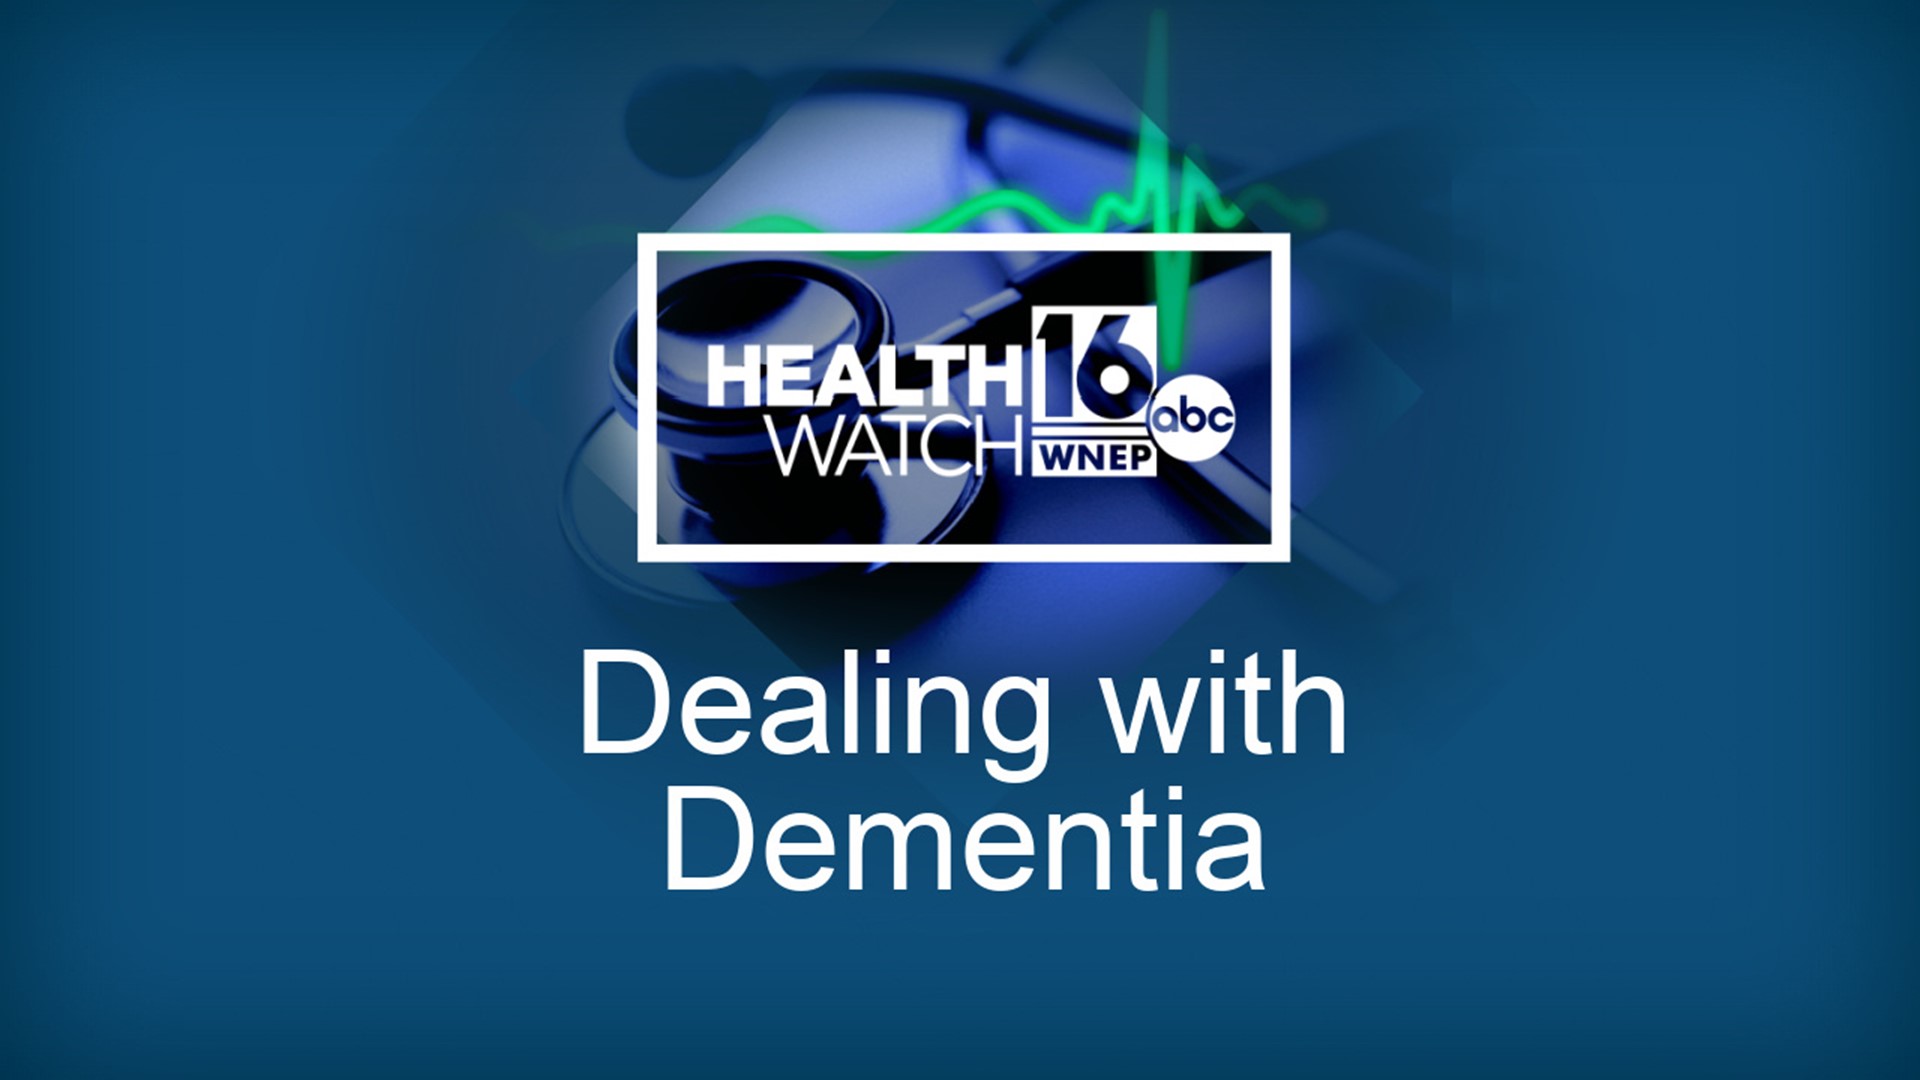 A program starting this month at the Wright Center for Community Health hopes to help both the patients who suffer from dementia and their families.